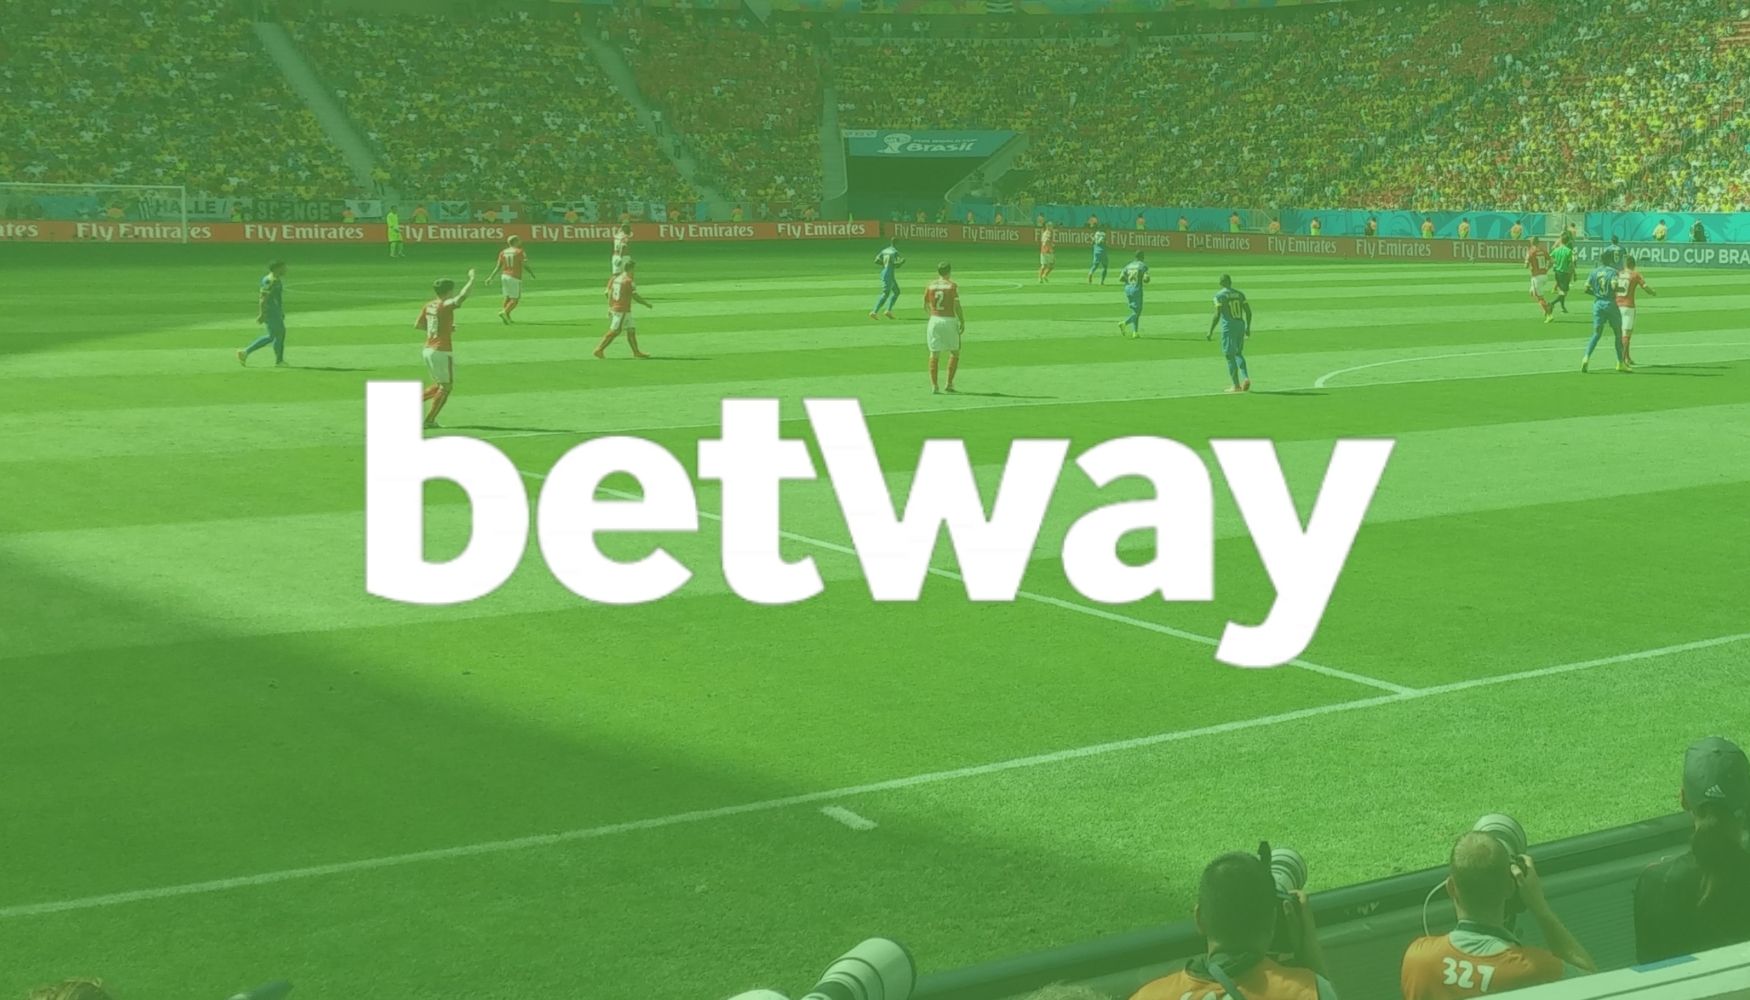 Betway official sports betting website overview